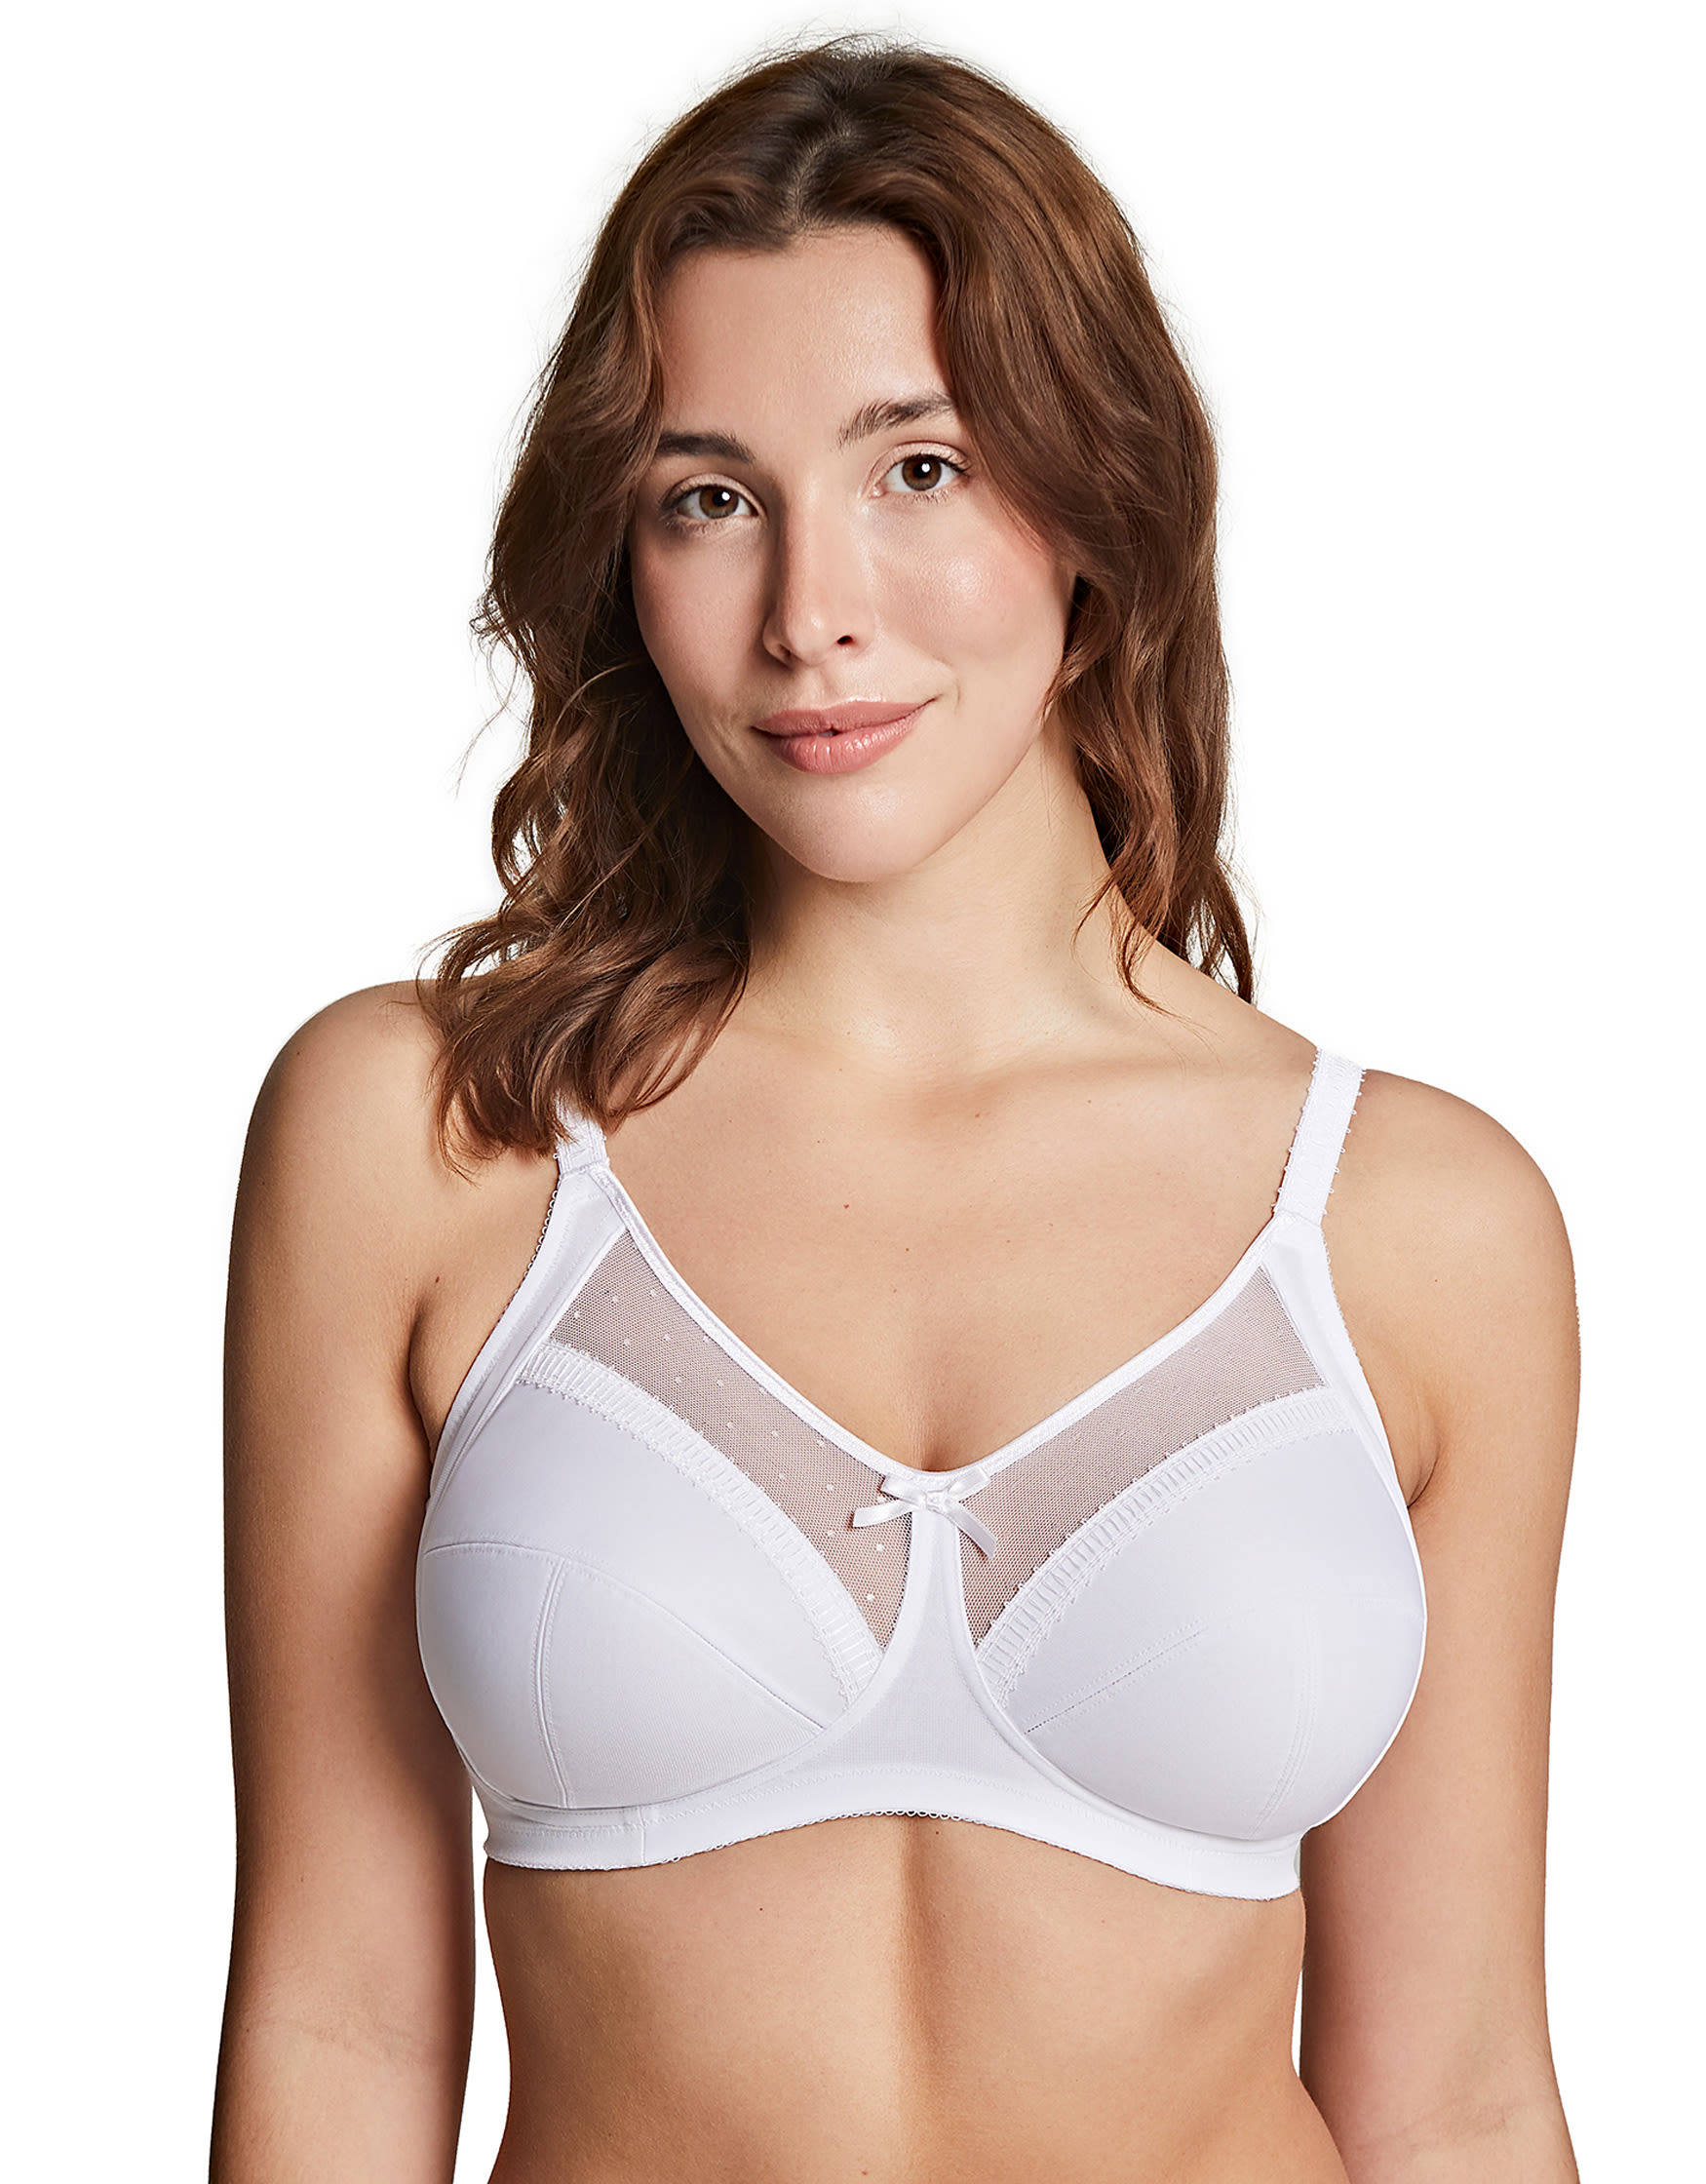 30 SECOND BRA REVIEW - Panache Andorra Non-Wired Bra - 28D to 40J Cups -  28G Lingerie Model 